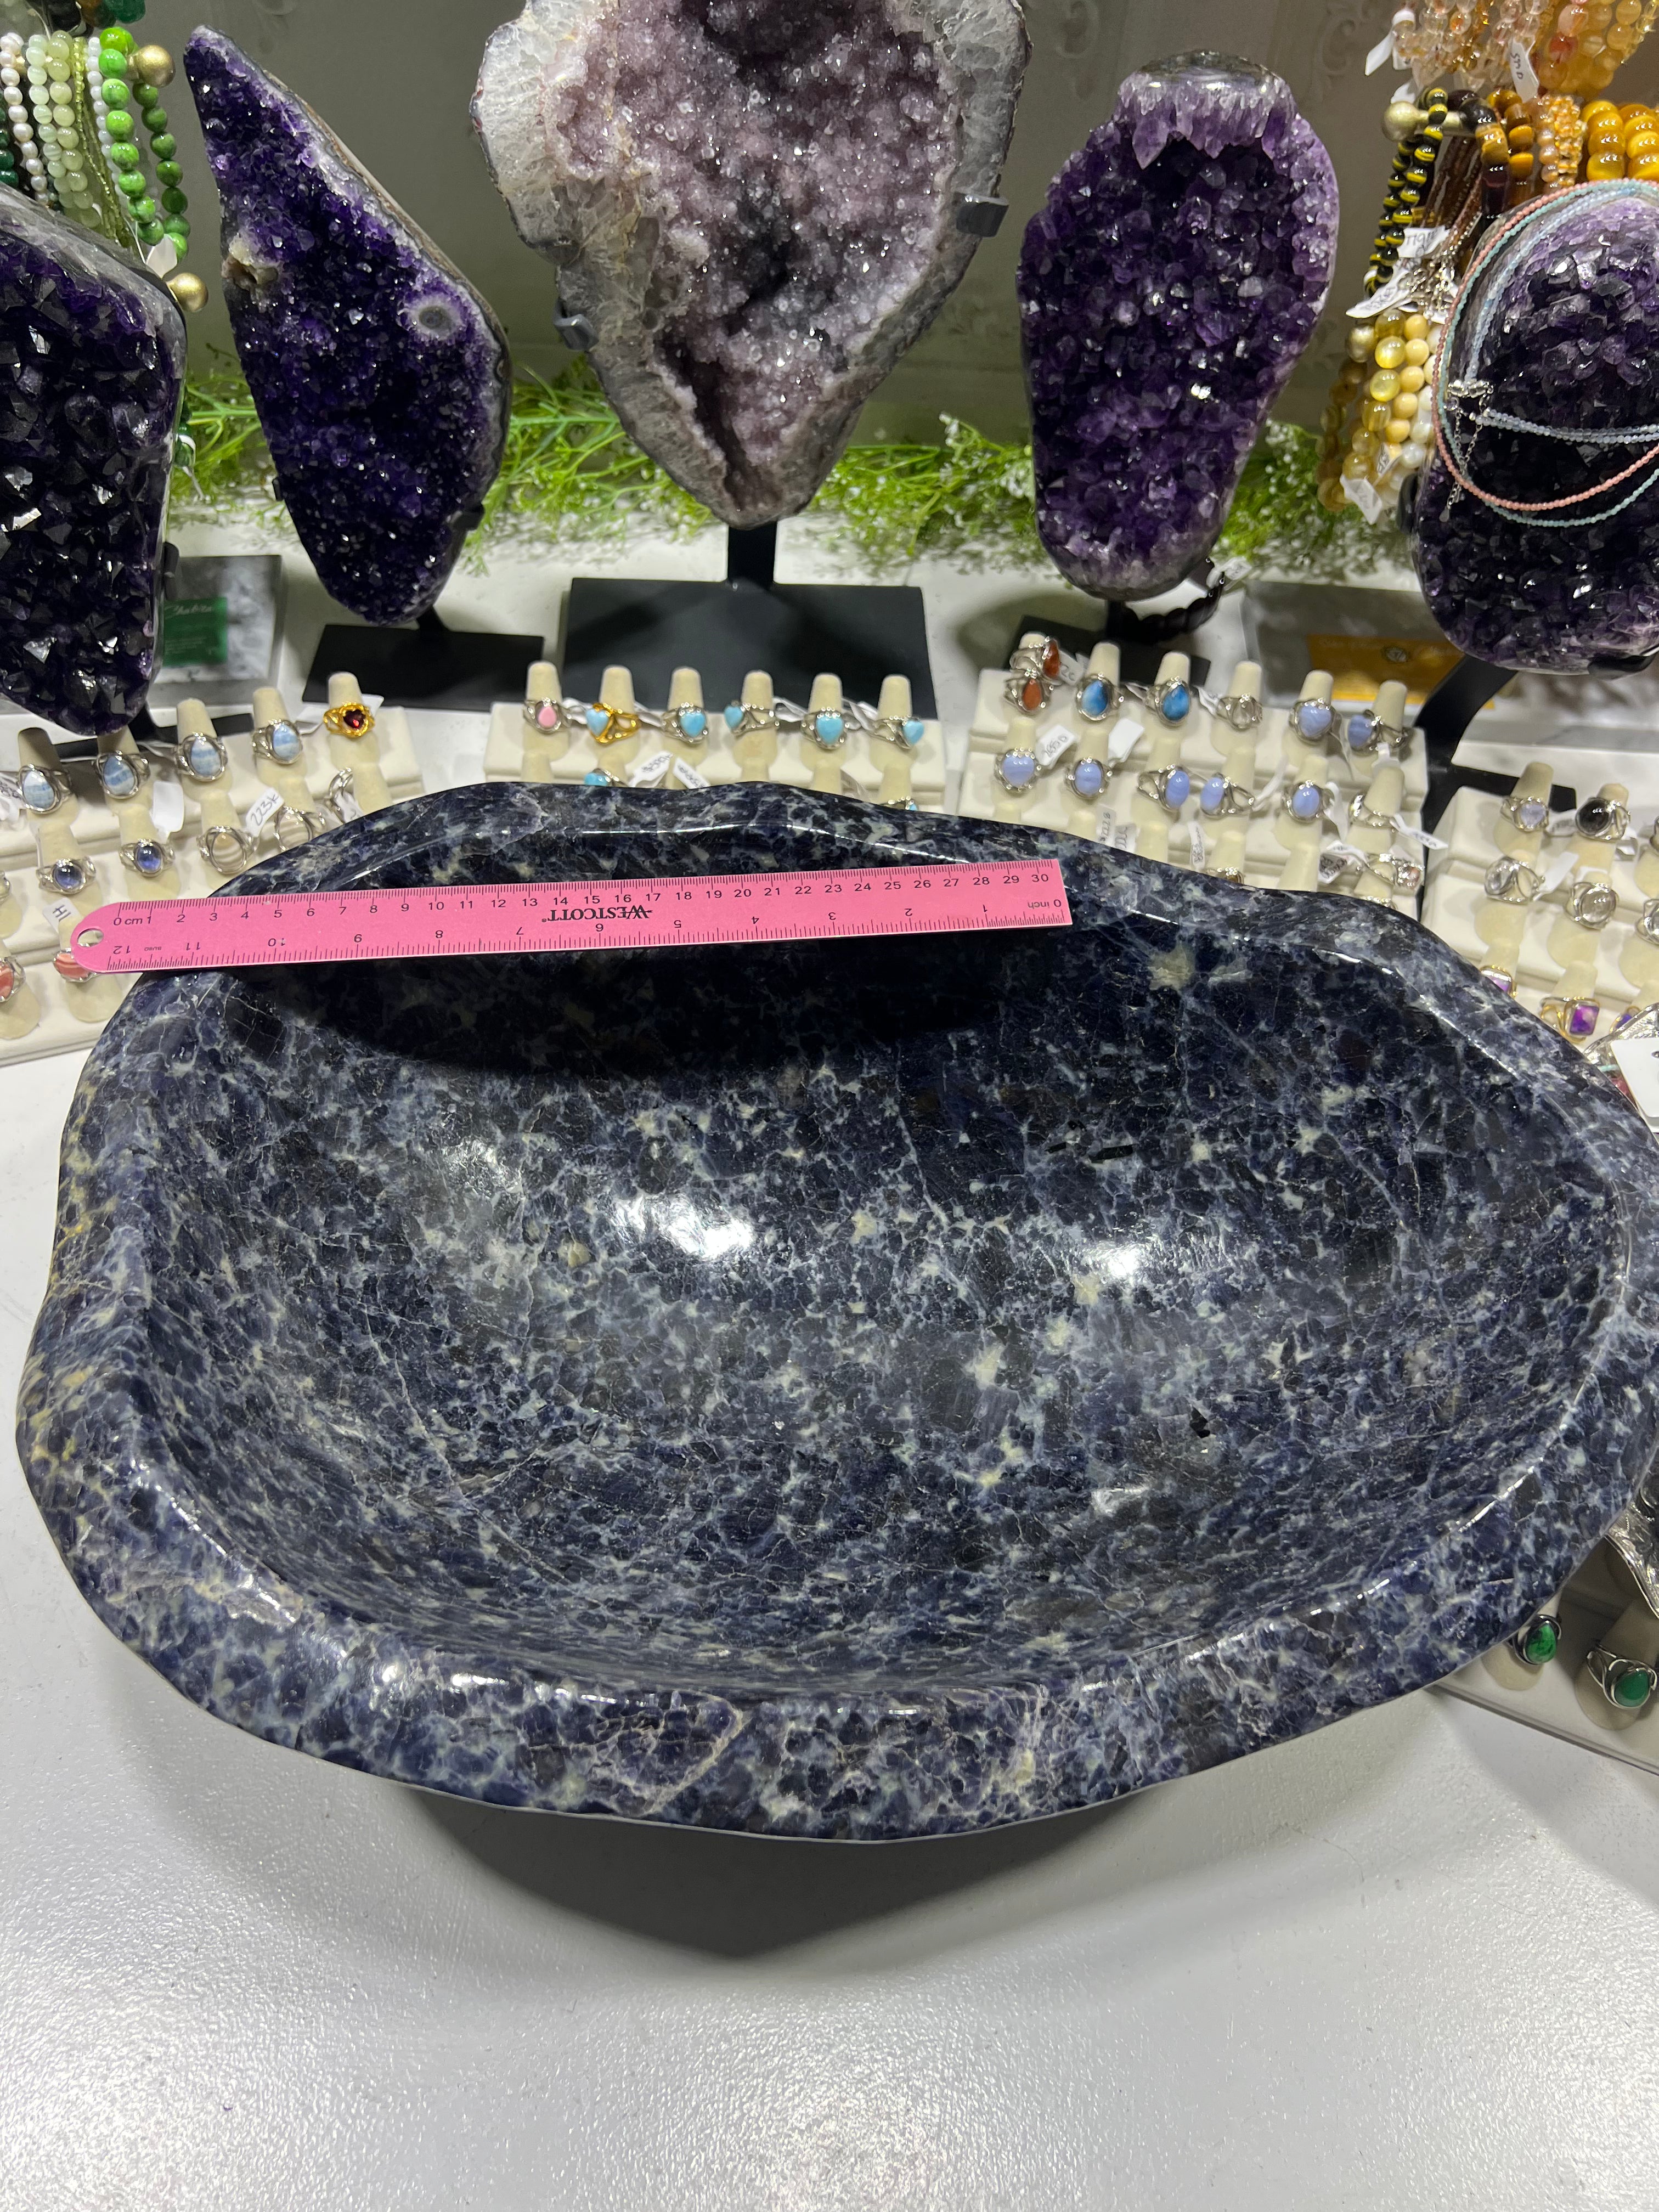 XXL Iolite Bowl for Storing Treasures and a Positive Mindset